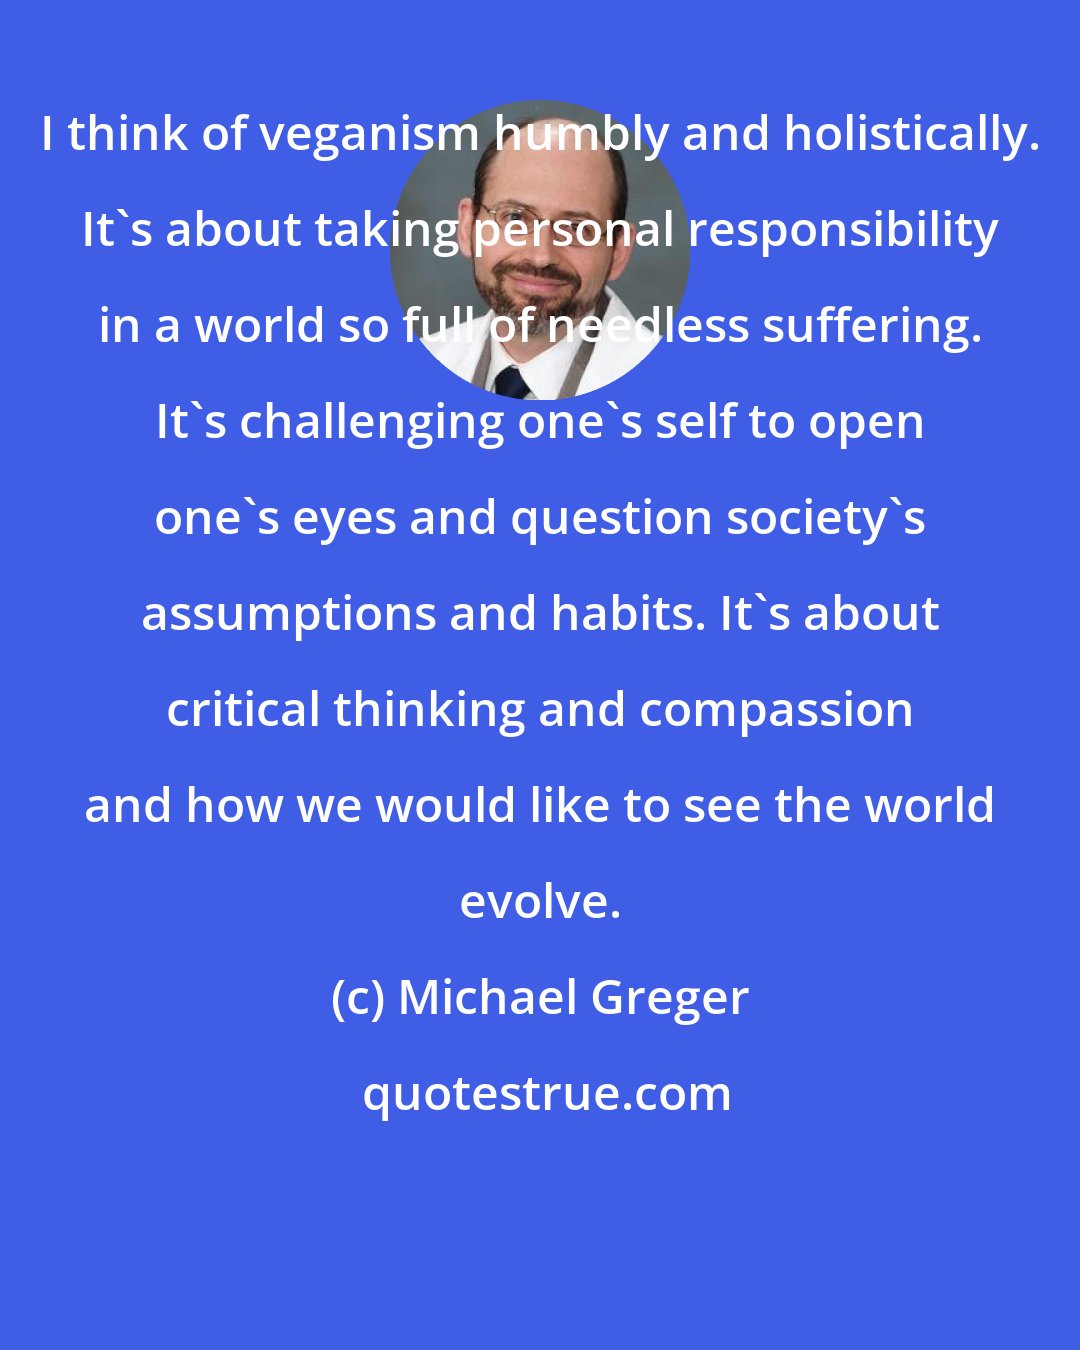 Michael Greger: I think of veganism humbly and holistically. It's about taking personal responsibility in a world so full of needless suffering. It's challenging one's self to open one's eyes and question society's assumptions and habits. It's about critical thinking and compassion and how we would like to see the world evolve.